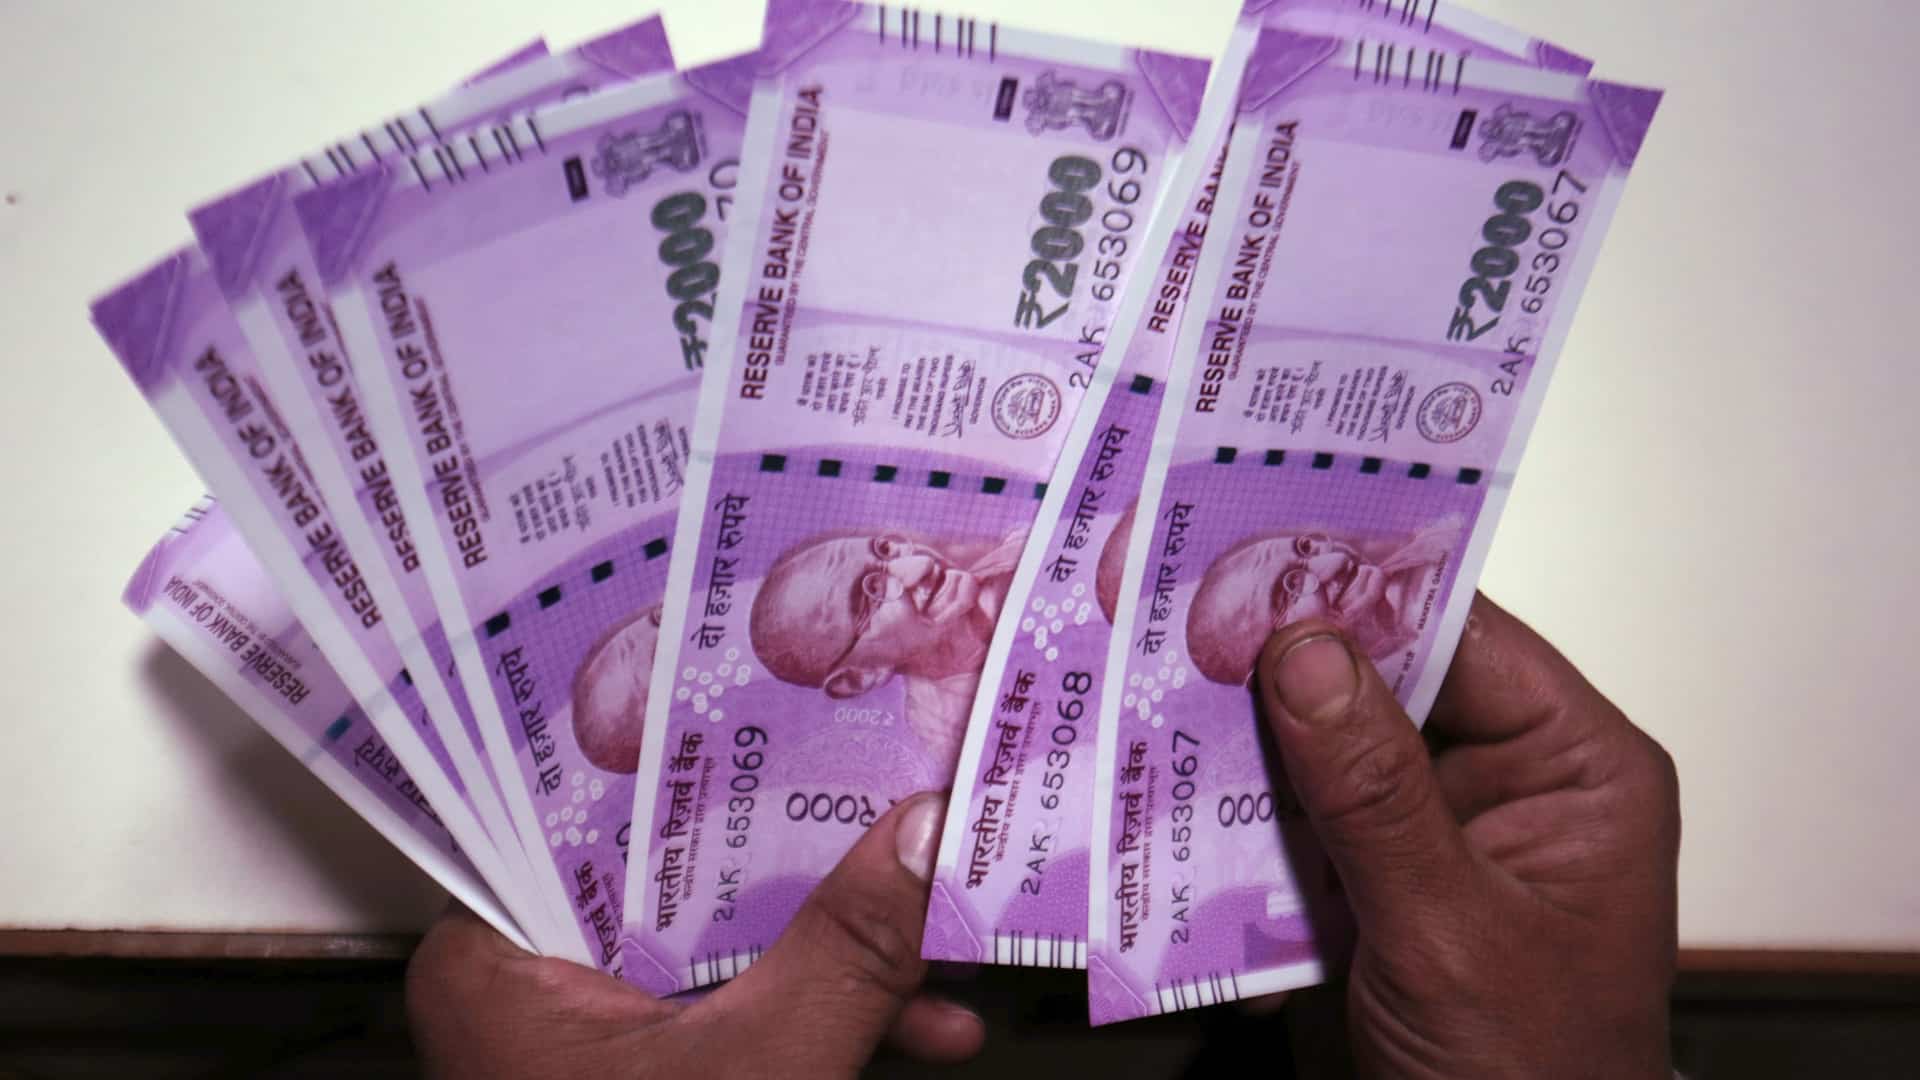 More than two-thirds of Rs 2,000 notes returned within a month of withdrawal: Das